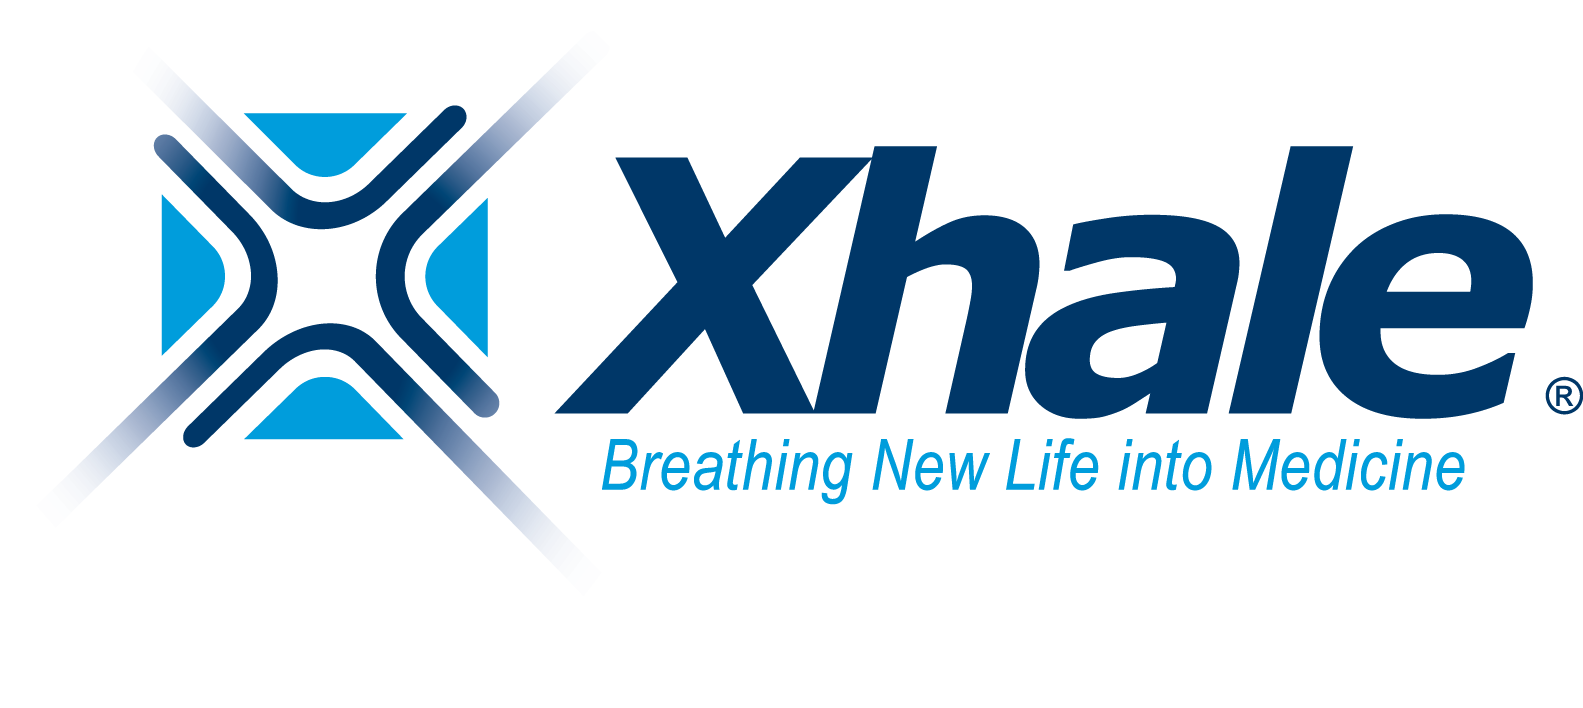 Xhale is a true medical technology innovator, developing products that transform healthcare and save lives.